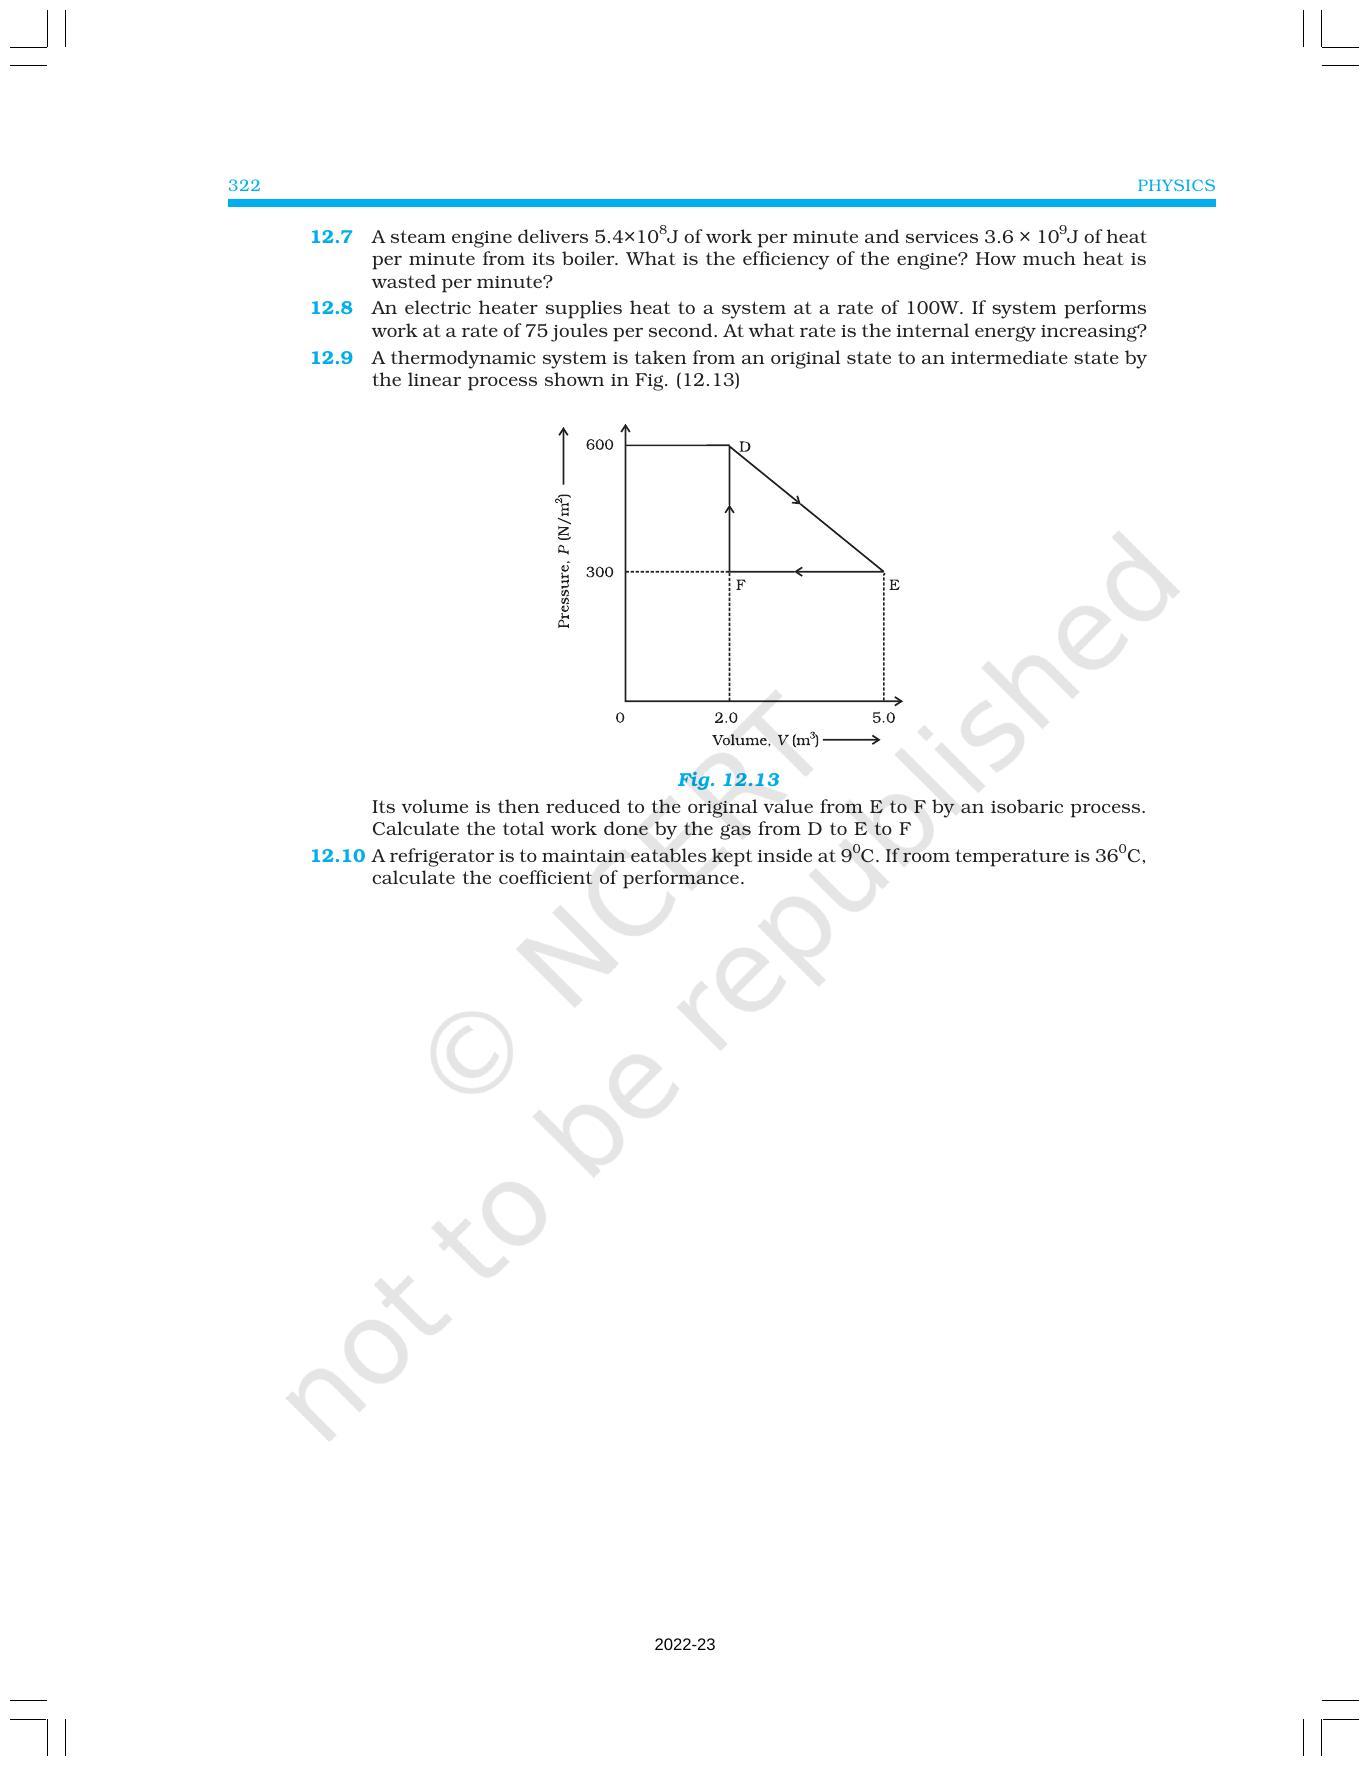 NCERT Book for Class 11 Physics Chapter 12 Thermodynamics - Page 20